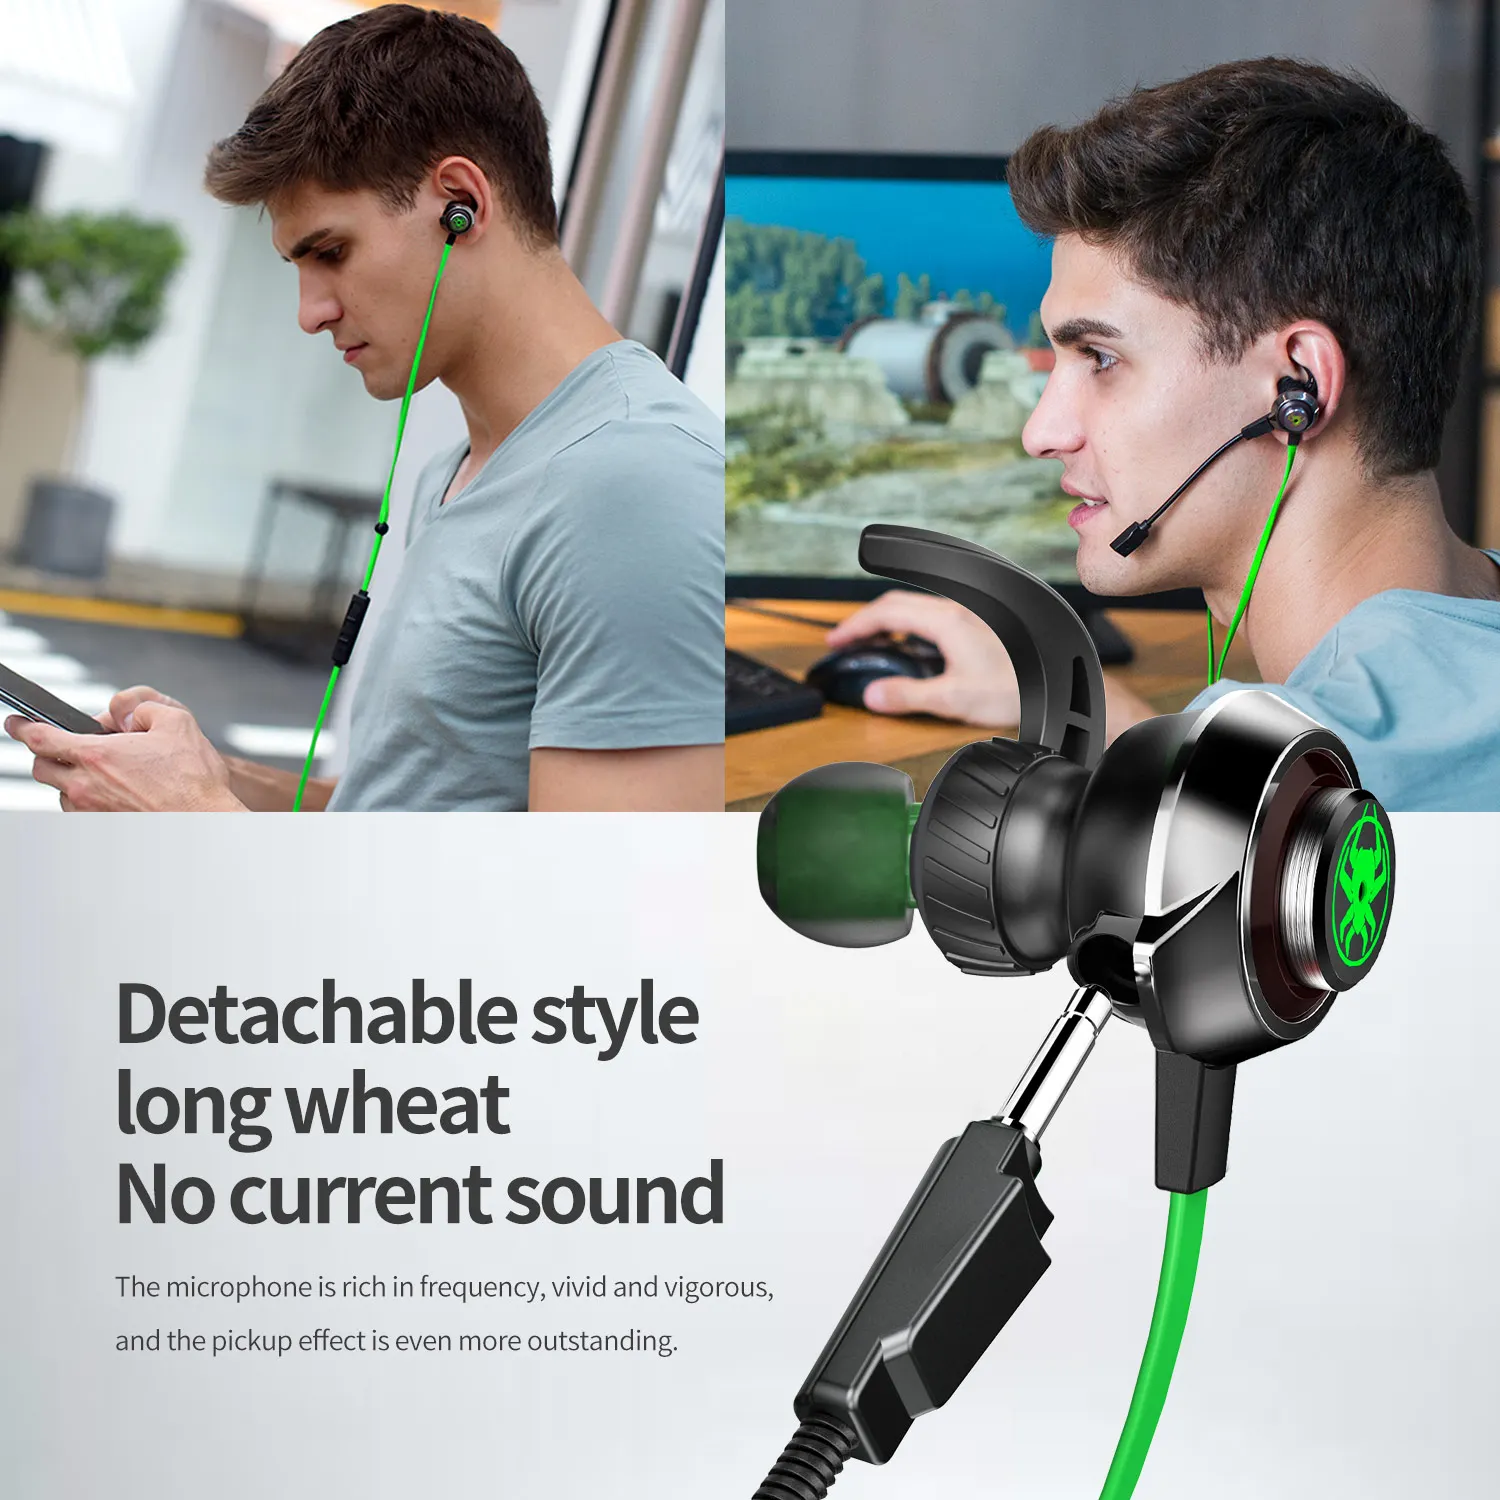 Buy GAINBANG G50 Gaming Wired Headsets Stereo Noise Cancelling PC Headphones with Detachable Long Microphone Earphones For All Games on